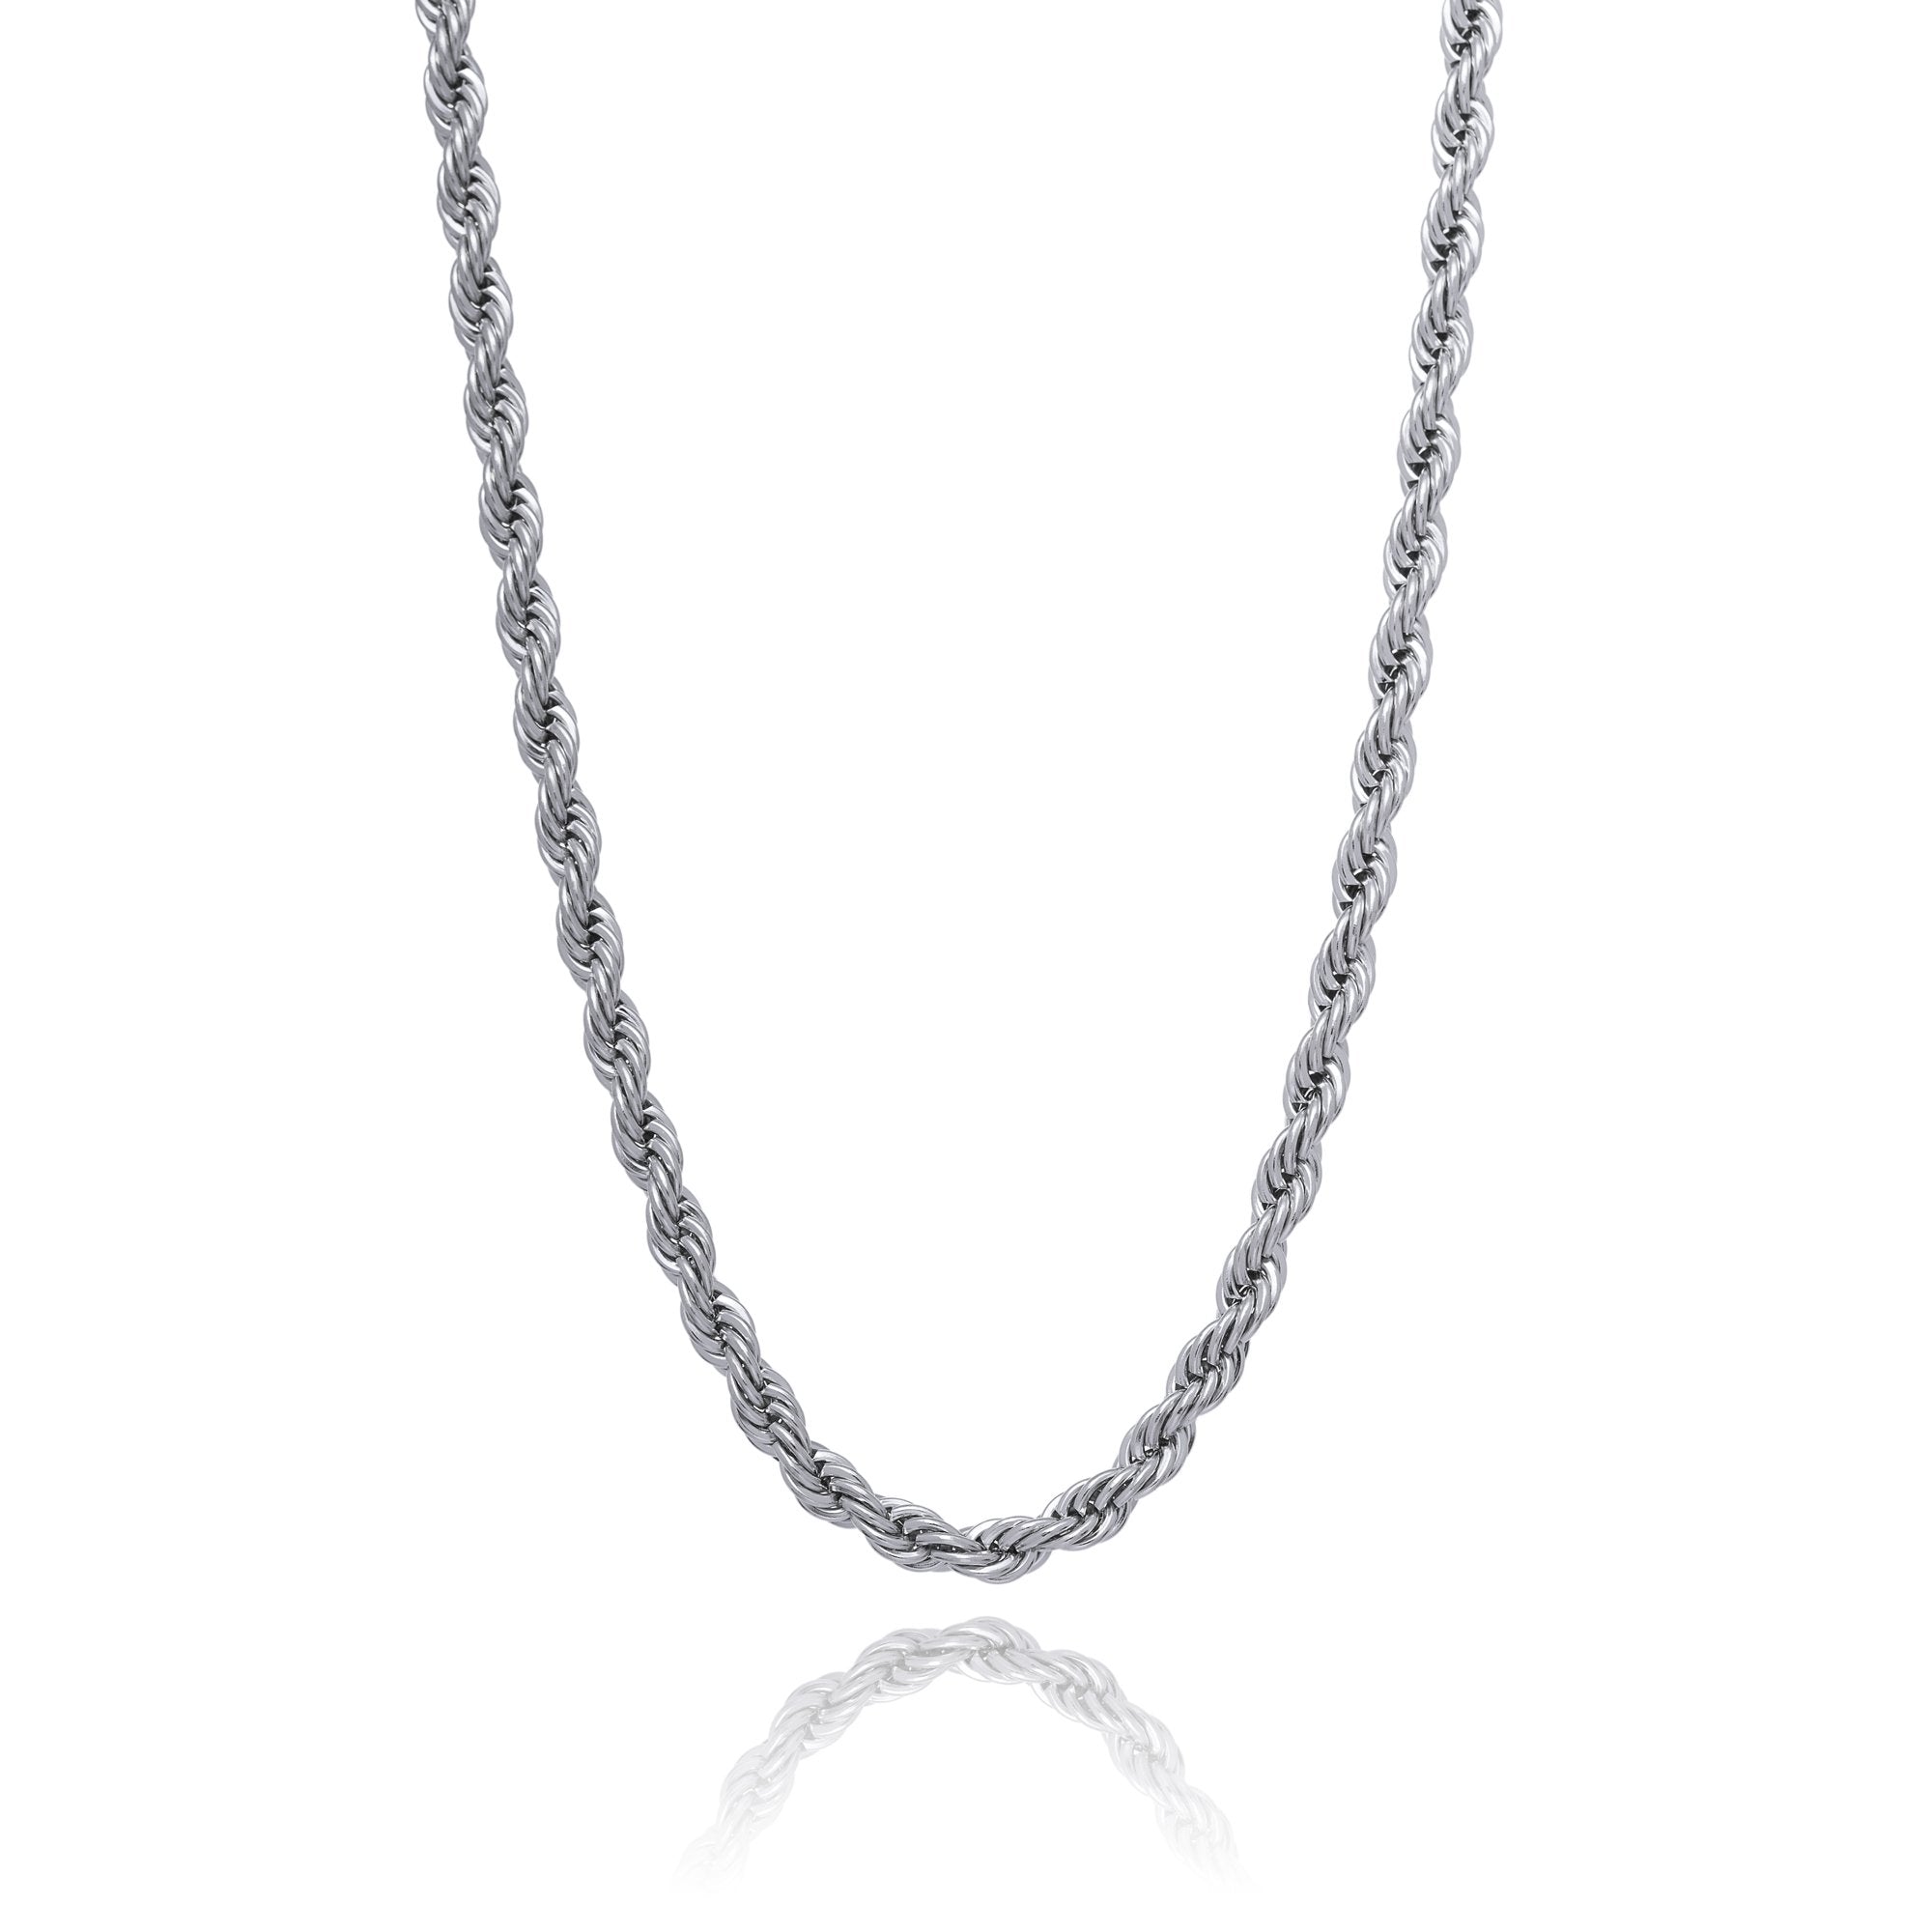 Rope Chain Mens Necklace by Statement Collective_01